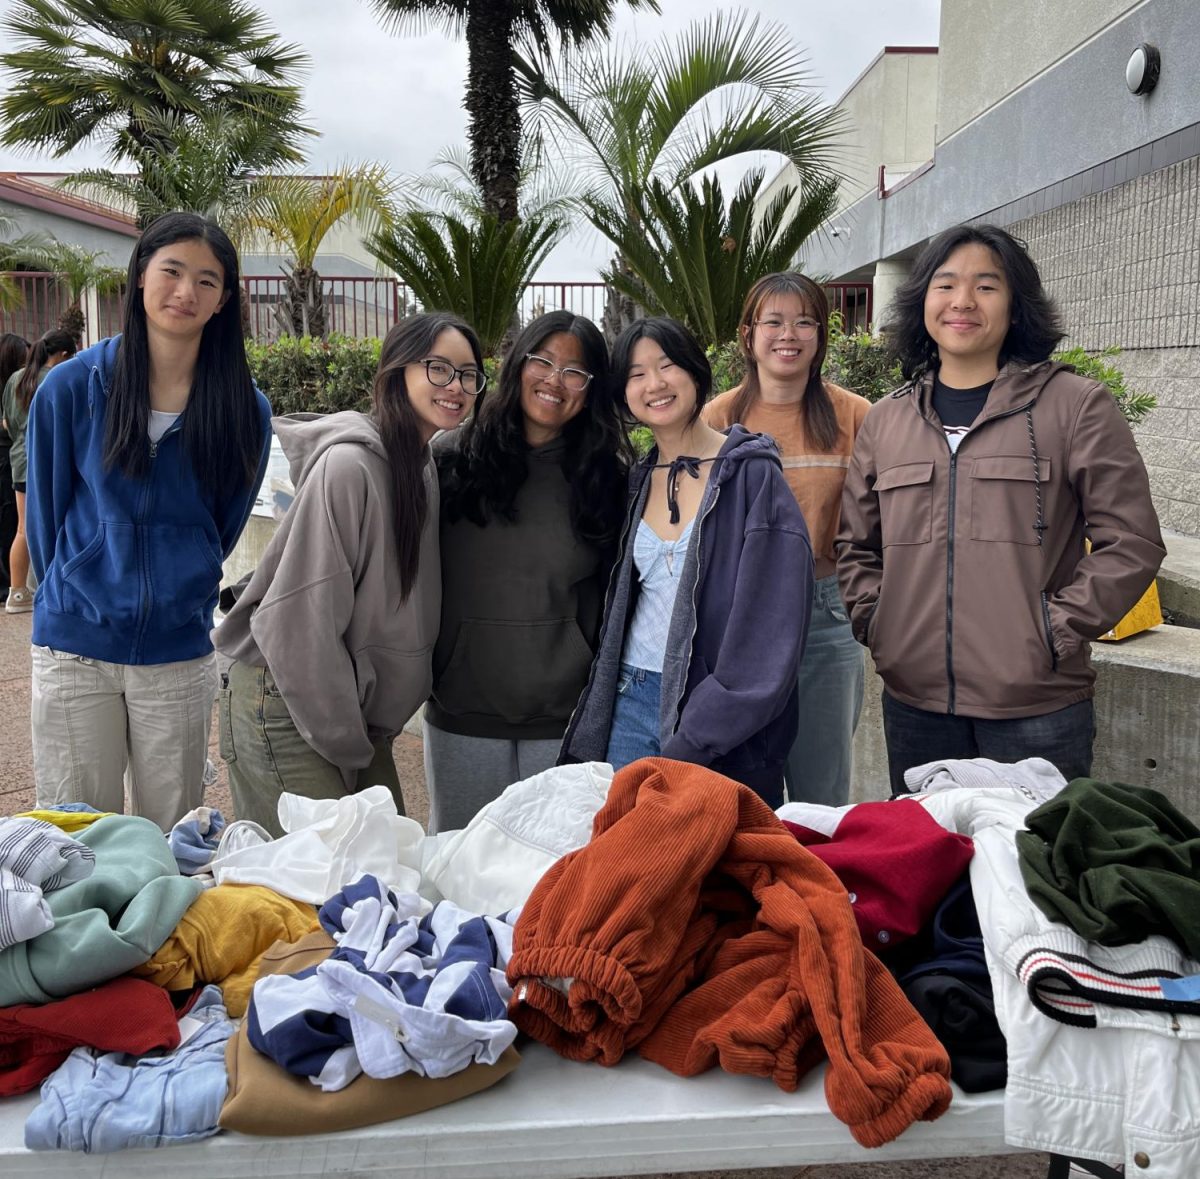 Although the school year is coming to an end, YIELD Pair club continues to engage students through the coordination of bonding activities that aid areas in need.  Pictured (left to right): Rachel Chen (9), Maiah Torres (11), Katelyn Chang (11), Charlene Cheng (11), Abigail Banh (11), Jeremiah Park (11)